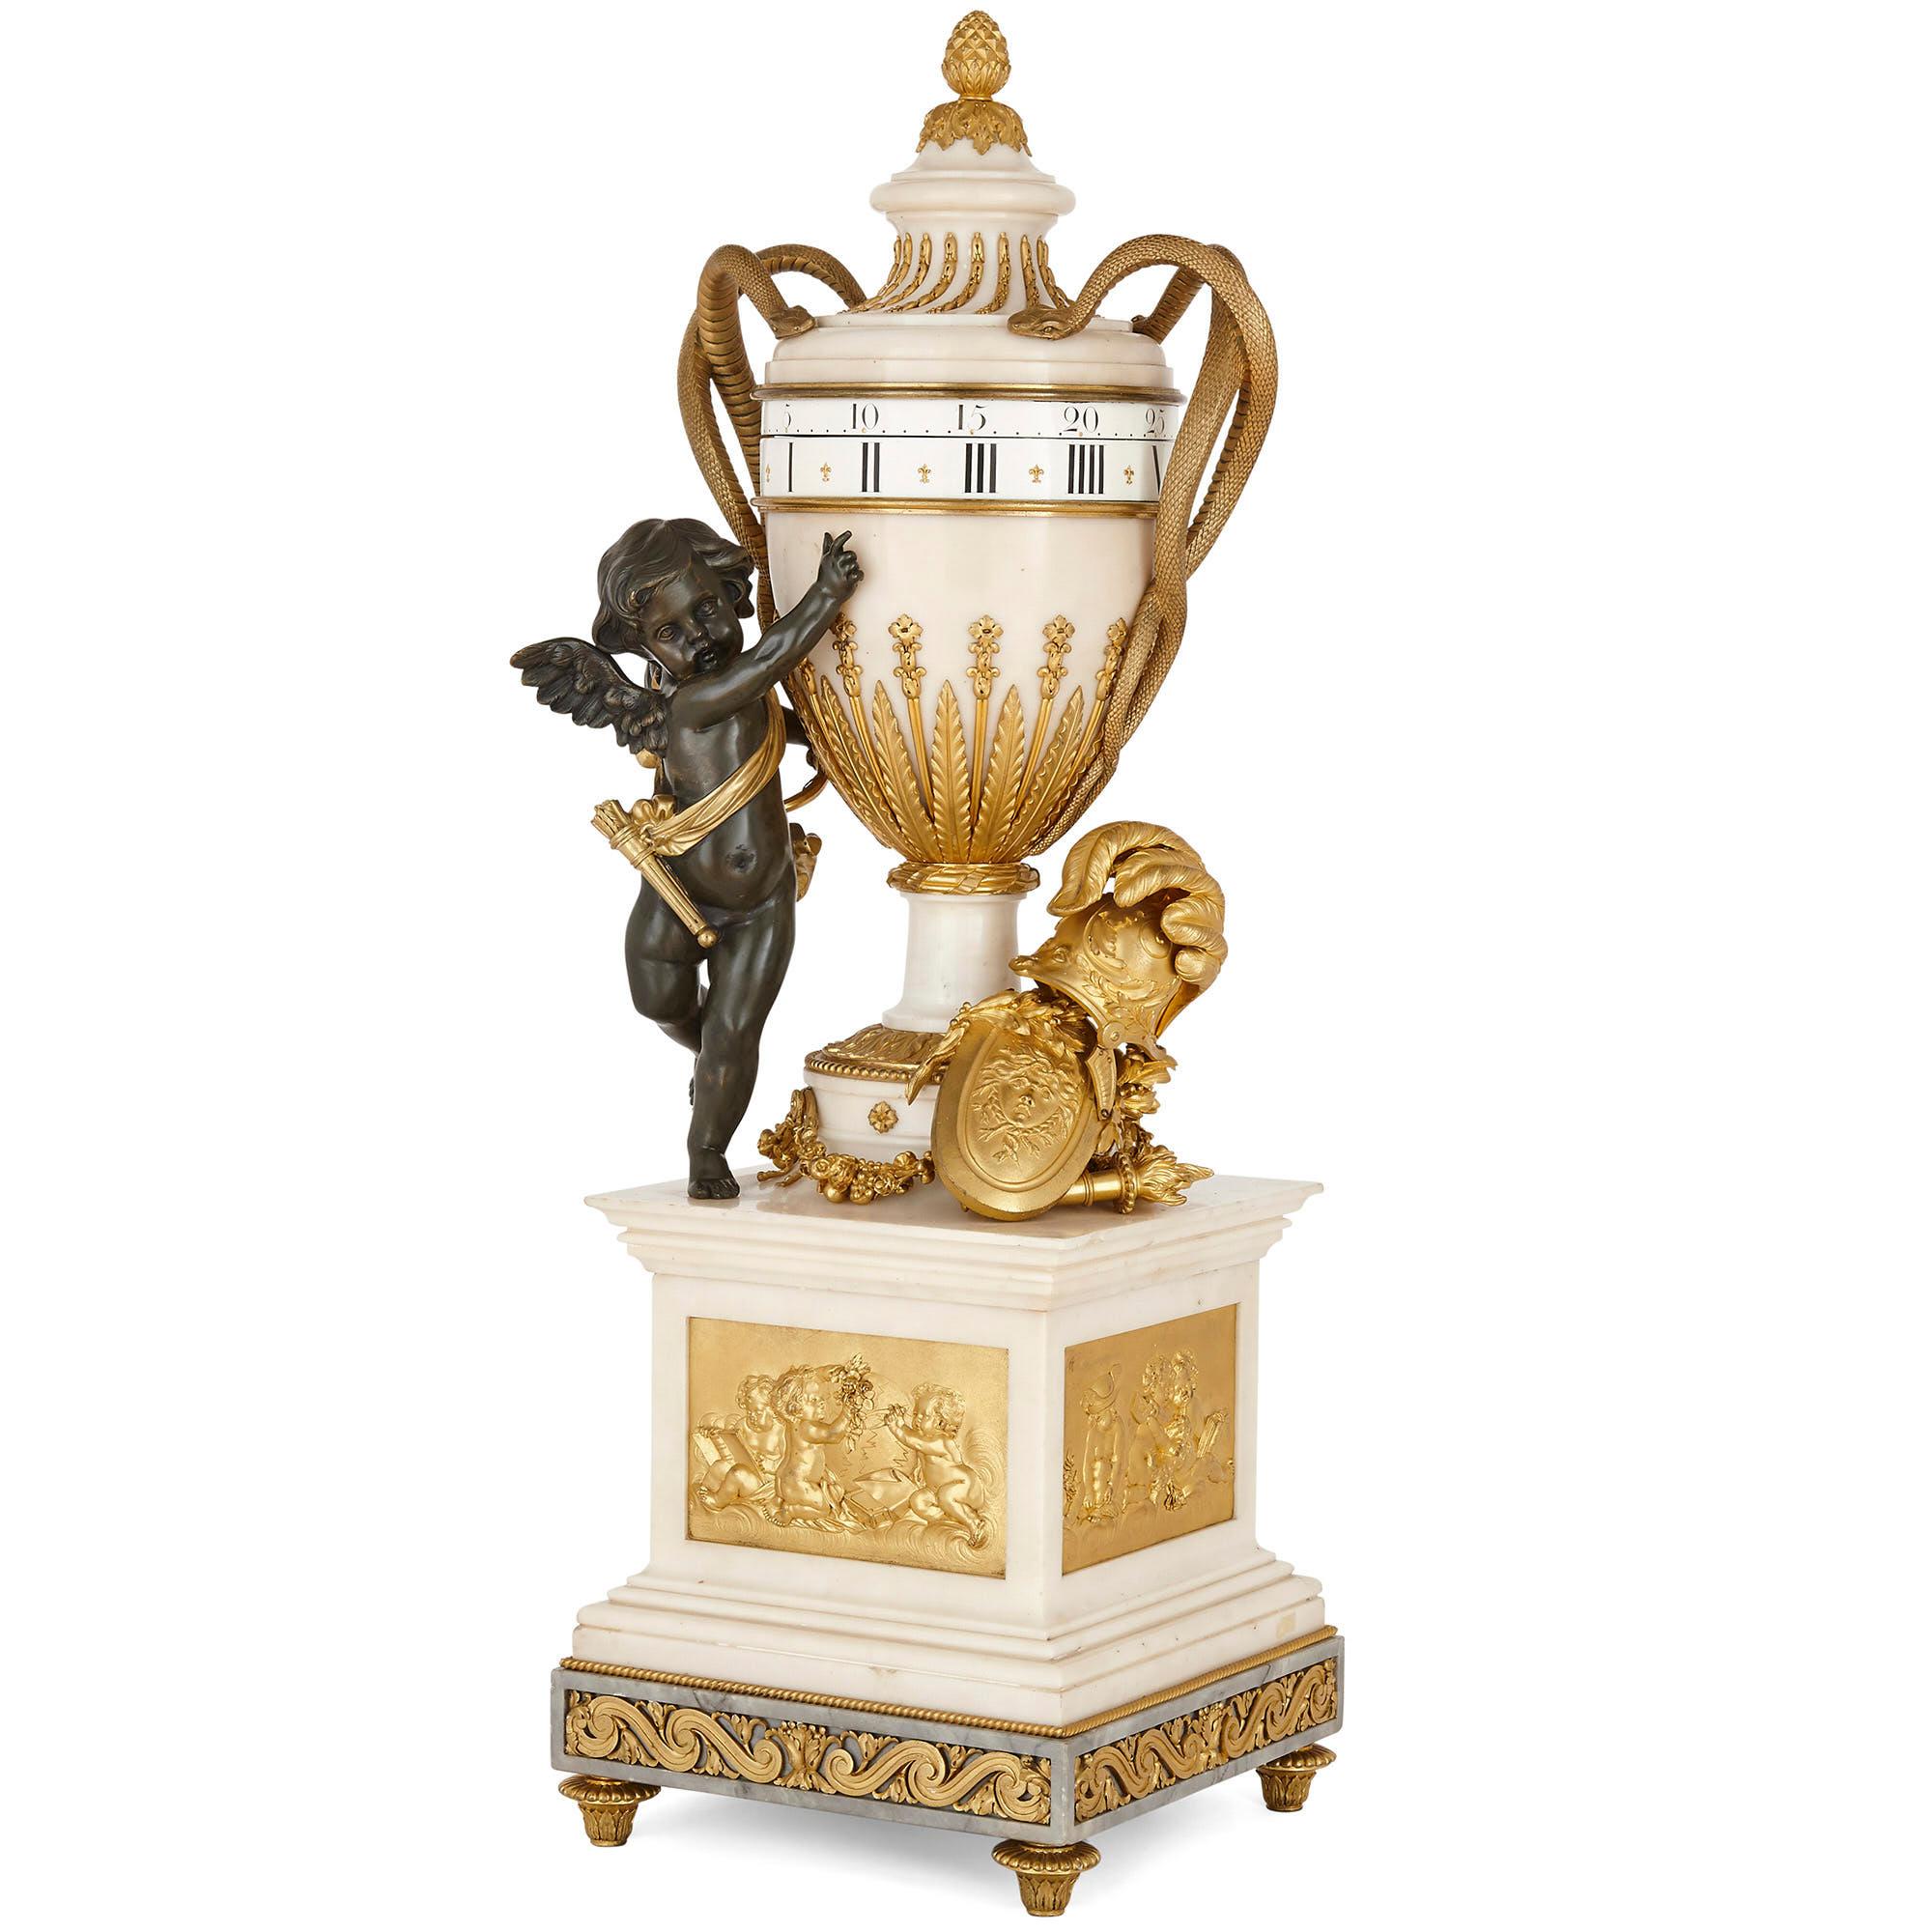 Large neoclassical style marble and gilt bronze circular movement mantel clock
French, late 19th century
Measures: Height 82cm, width 26cm, depth 26cm

Crafted from the finest of materials, including beautiful white marble, gilt bronze, and